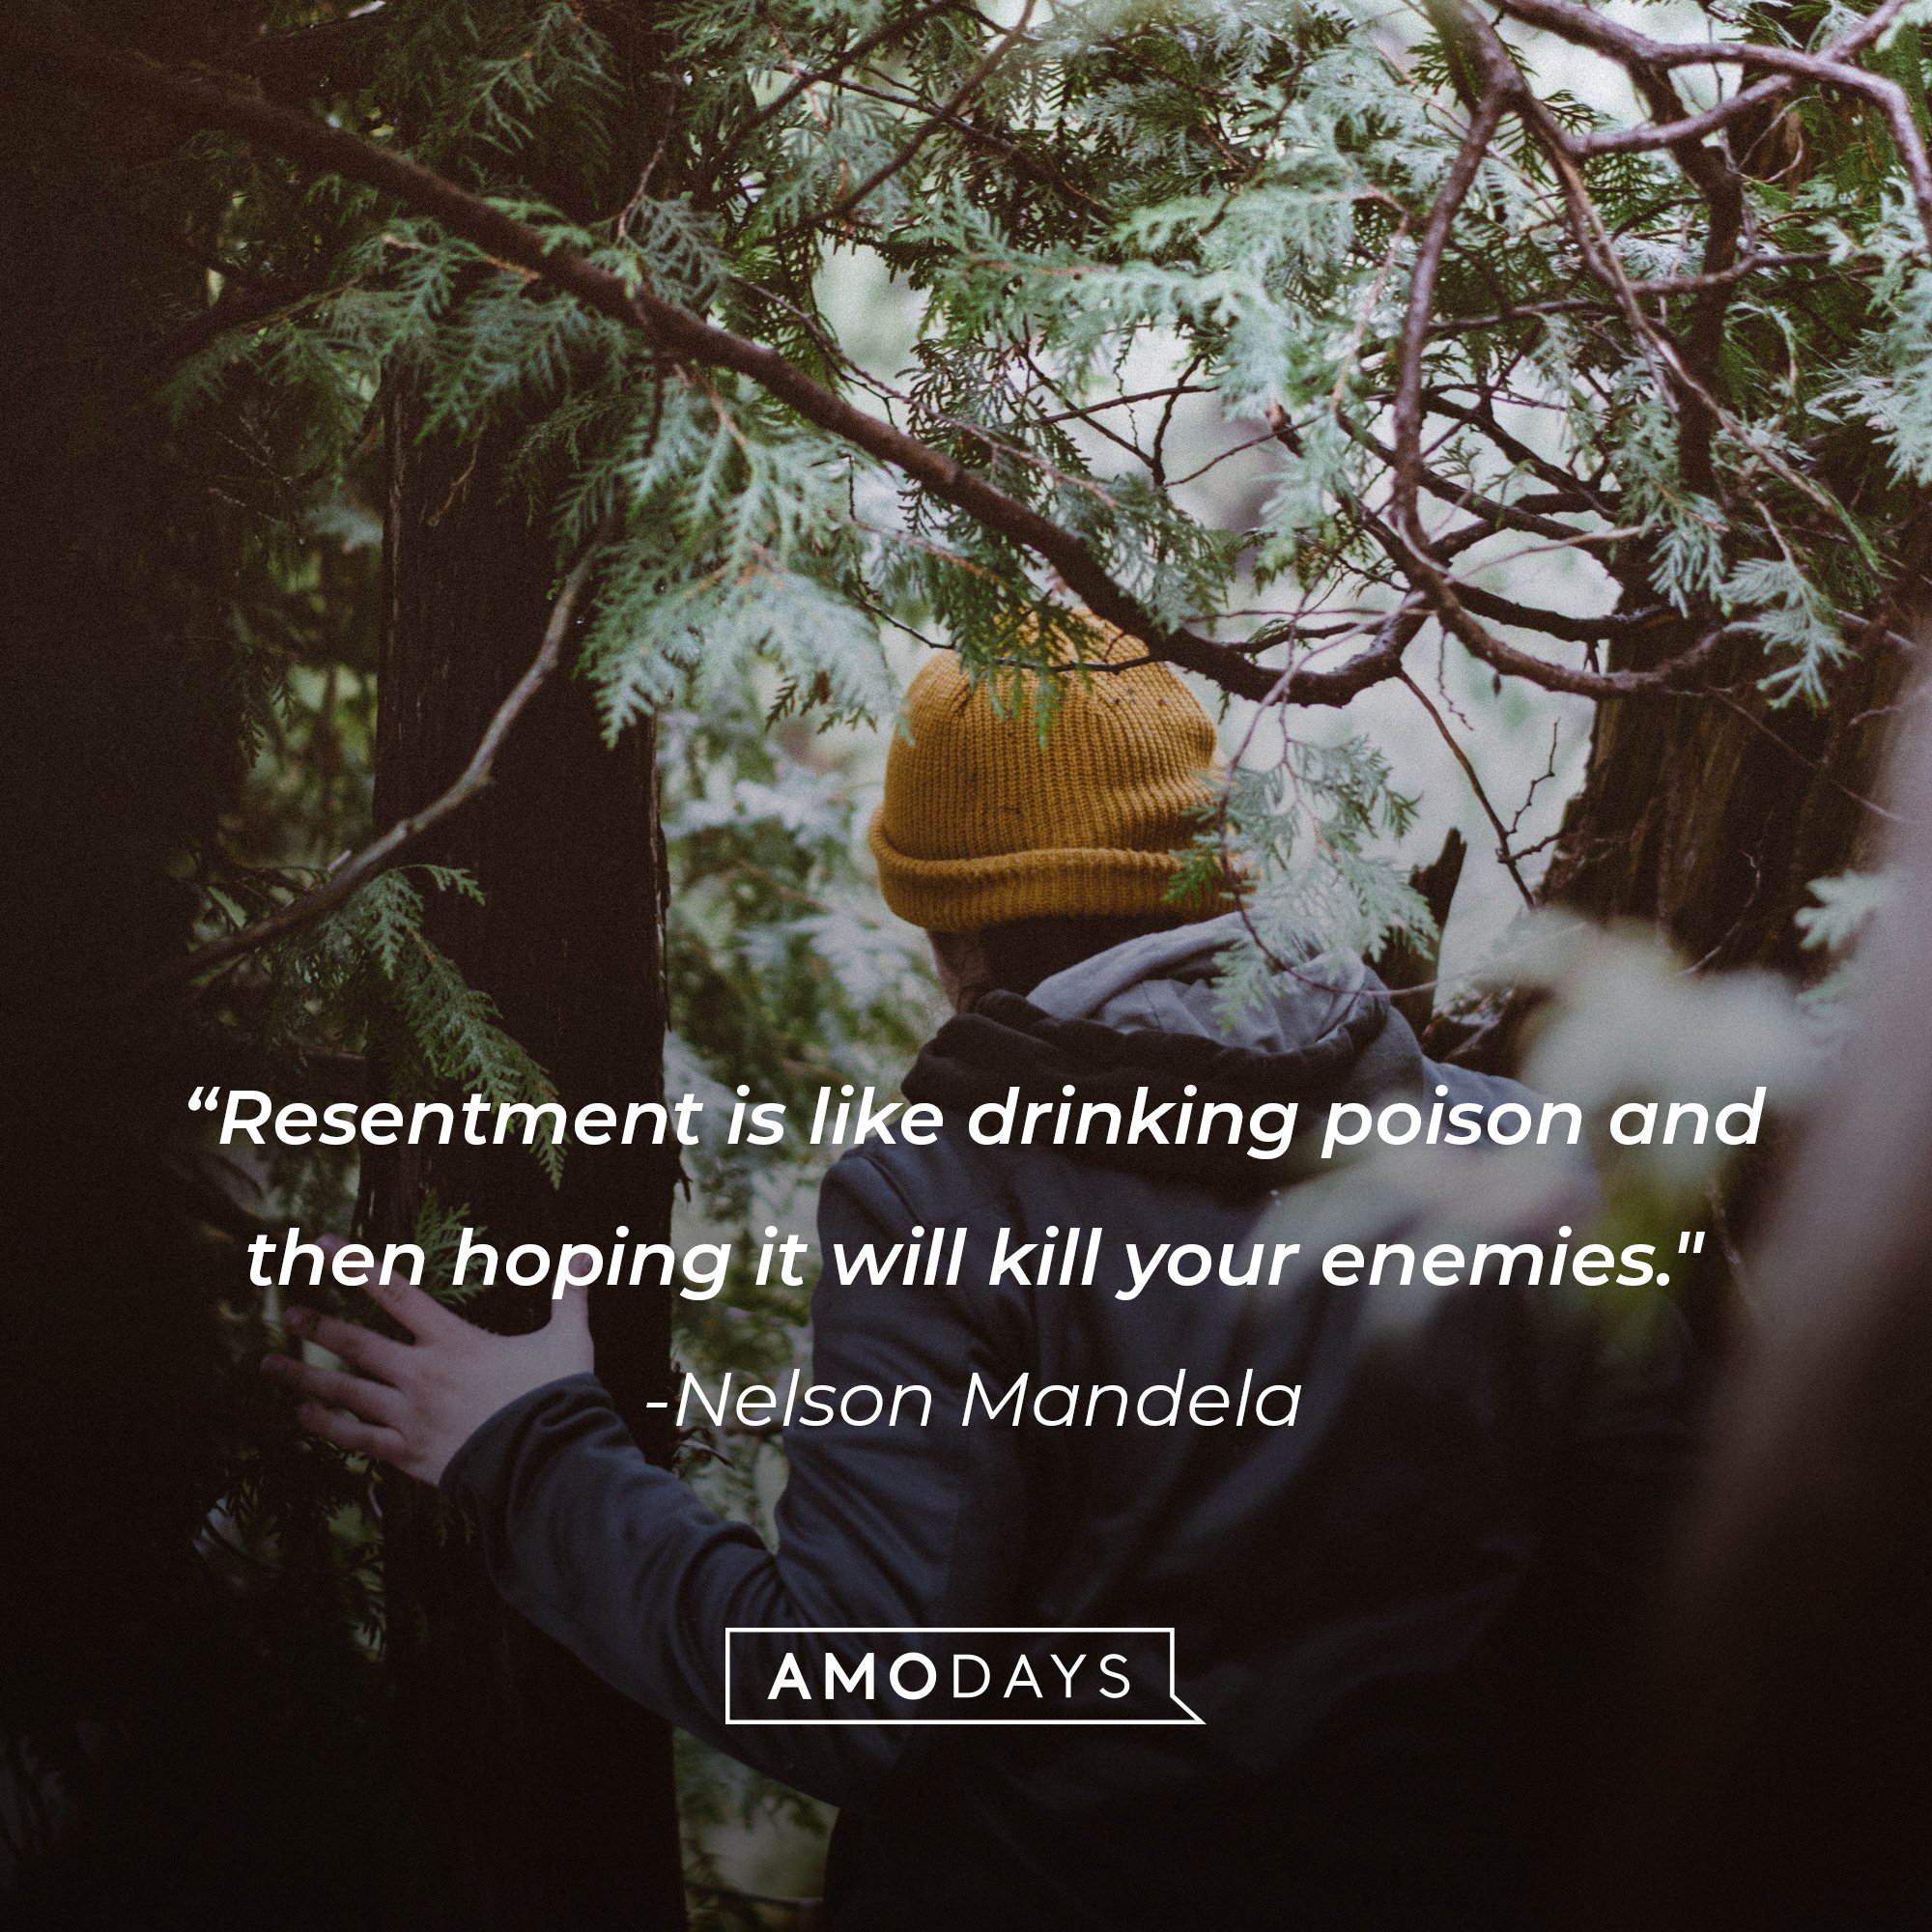 Nelson Mandela’s quote: "Resentment is like drinking poison and then hoping it will kill your enemies." | Image: AmoDays     